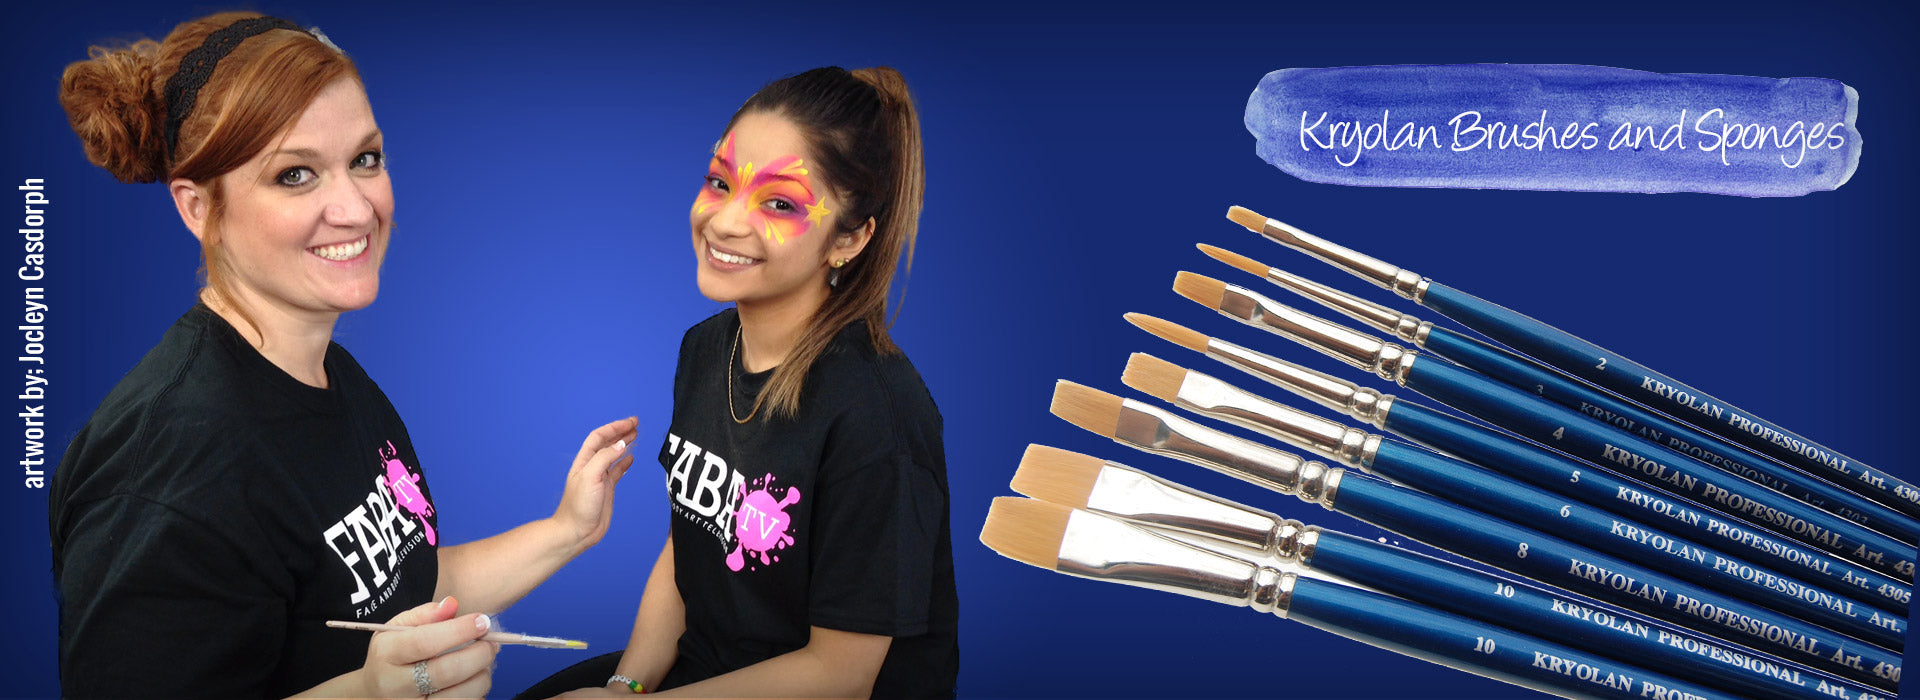 Brushes and Sponges, Face Paint Products, Silly Farm